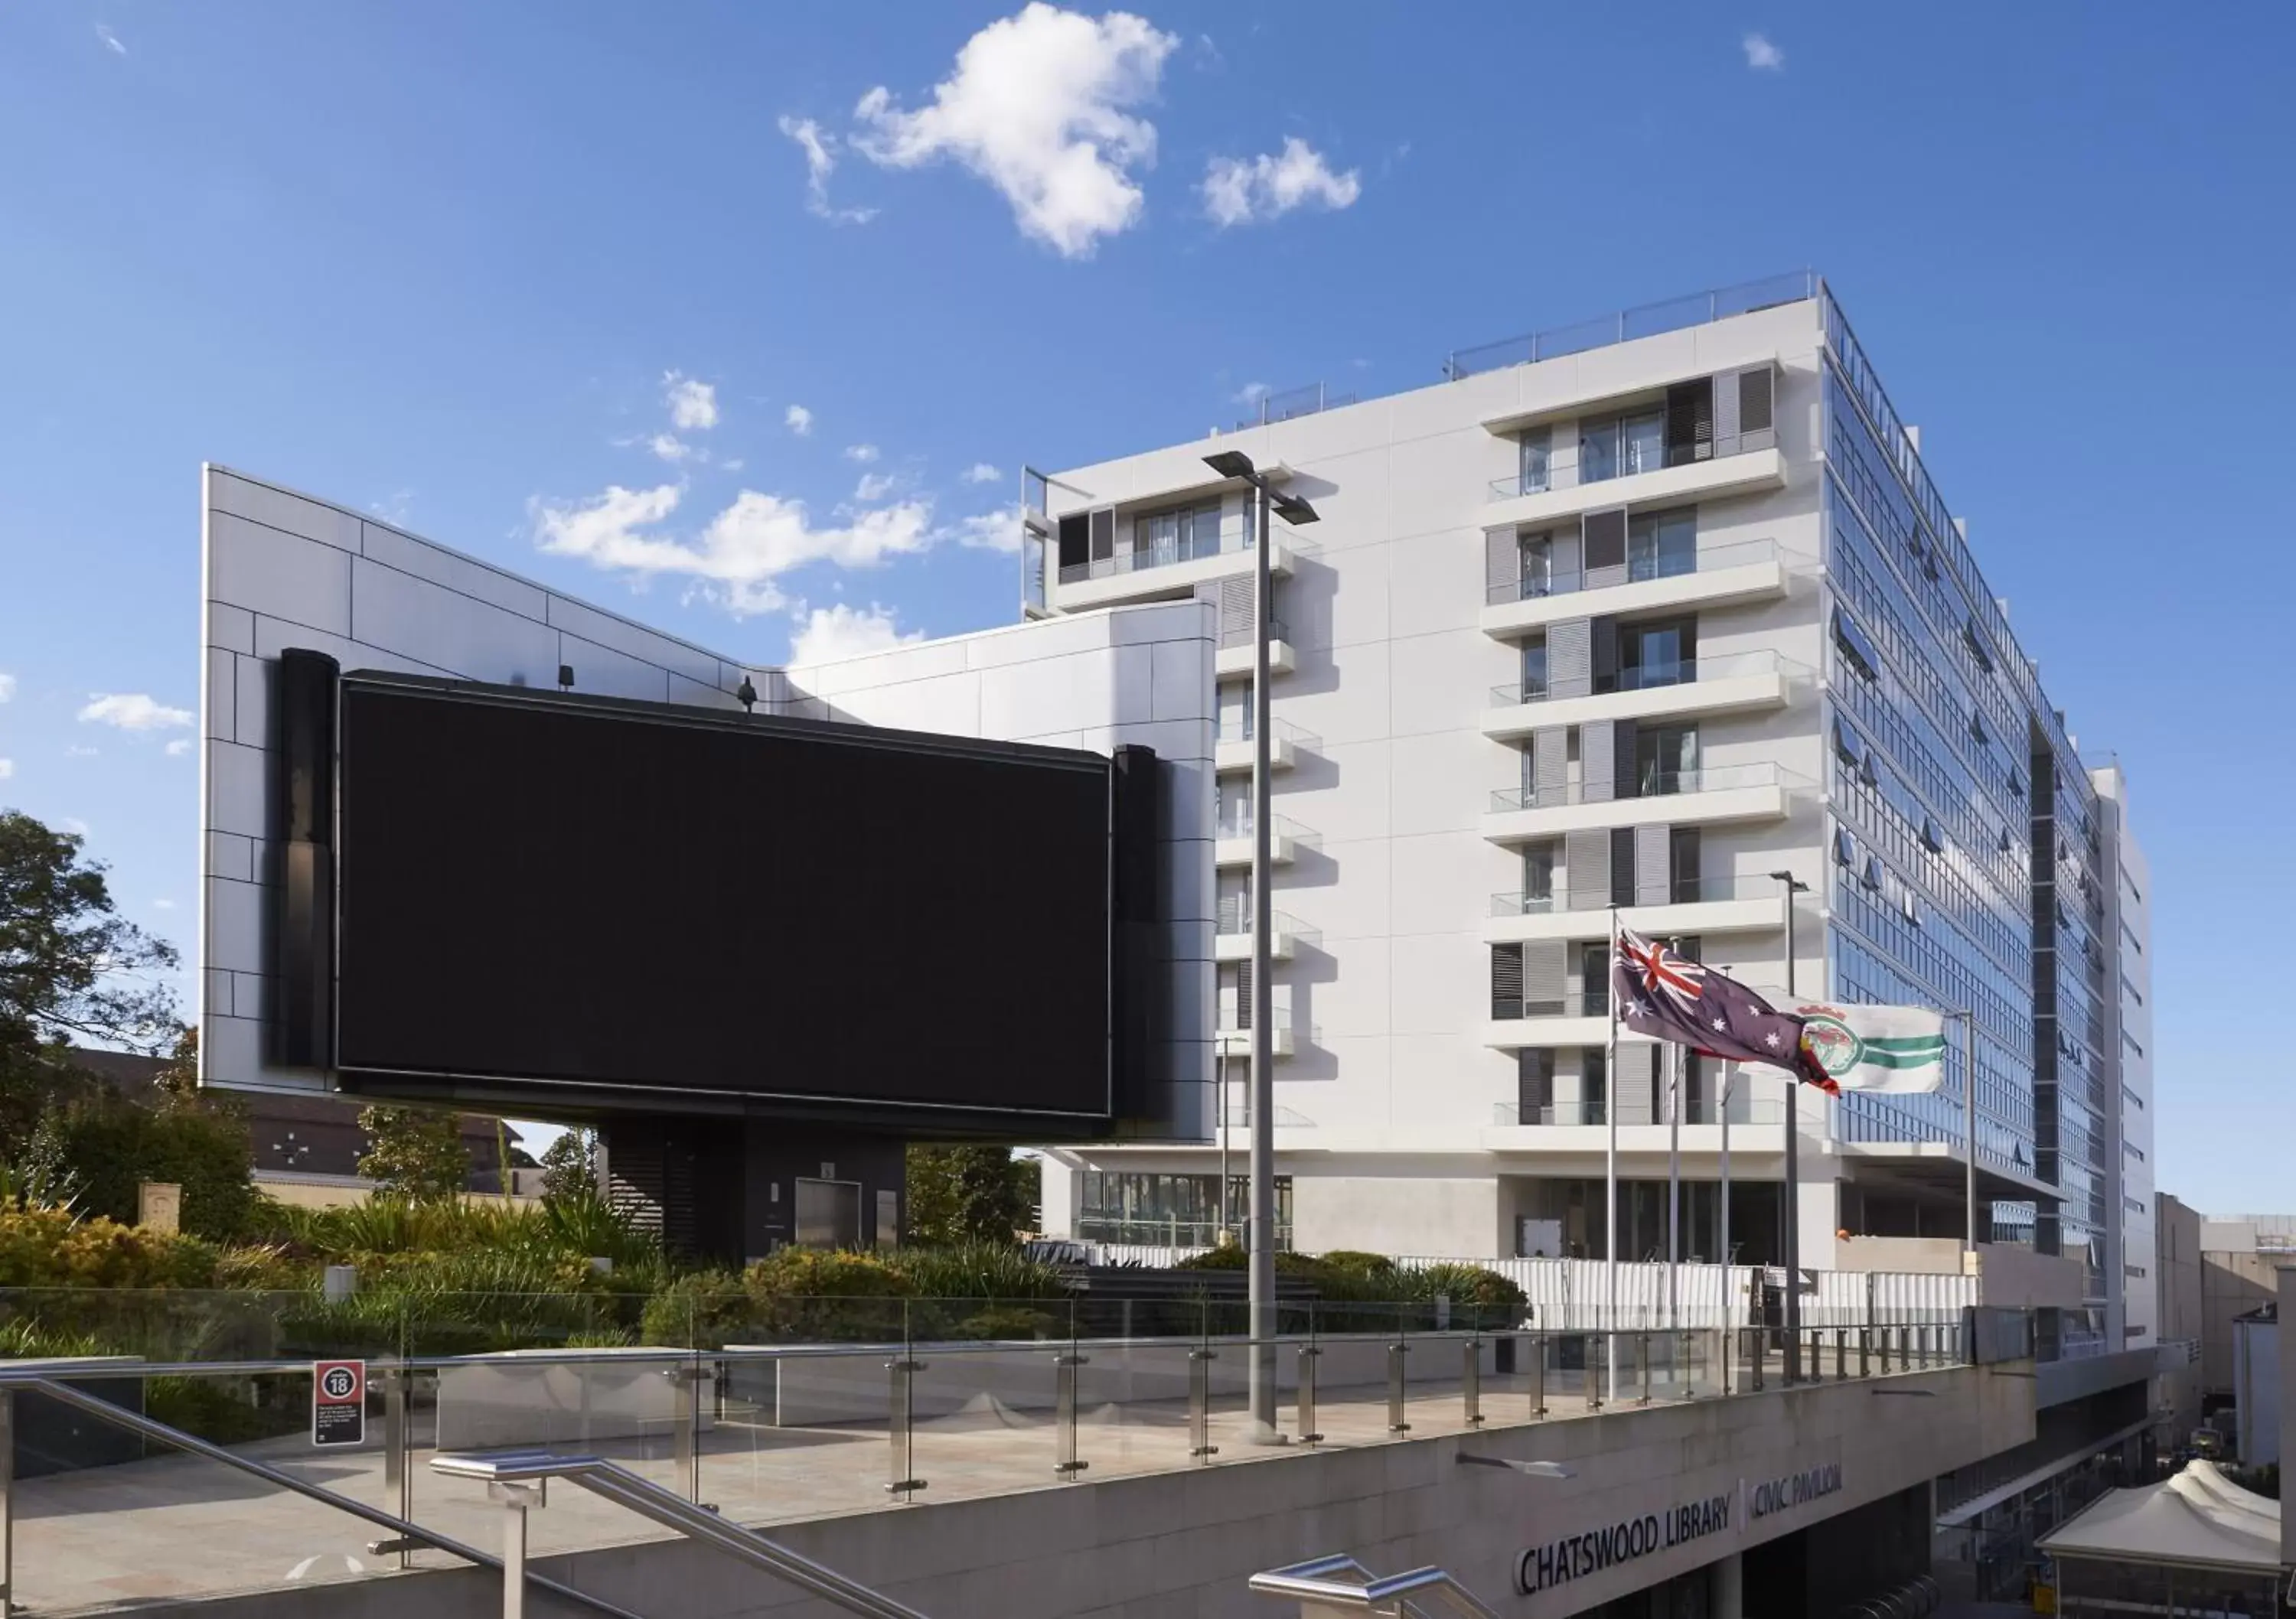 Property building, TV/Entertainment Center in Silkari Suites at Chatswood